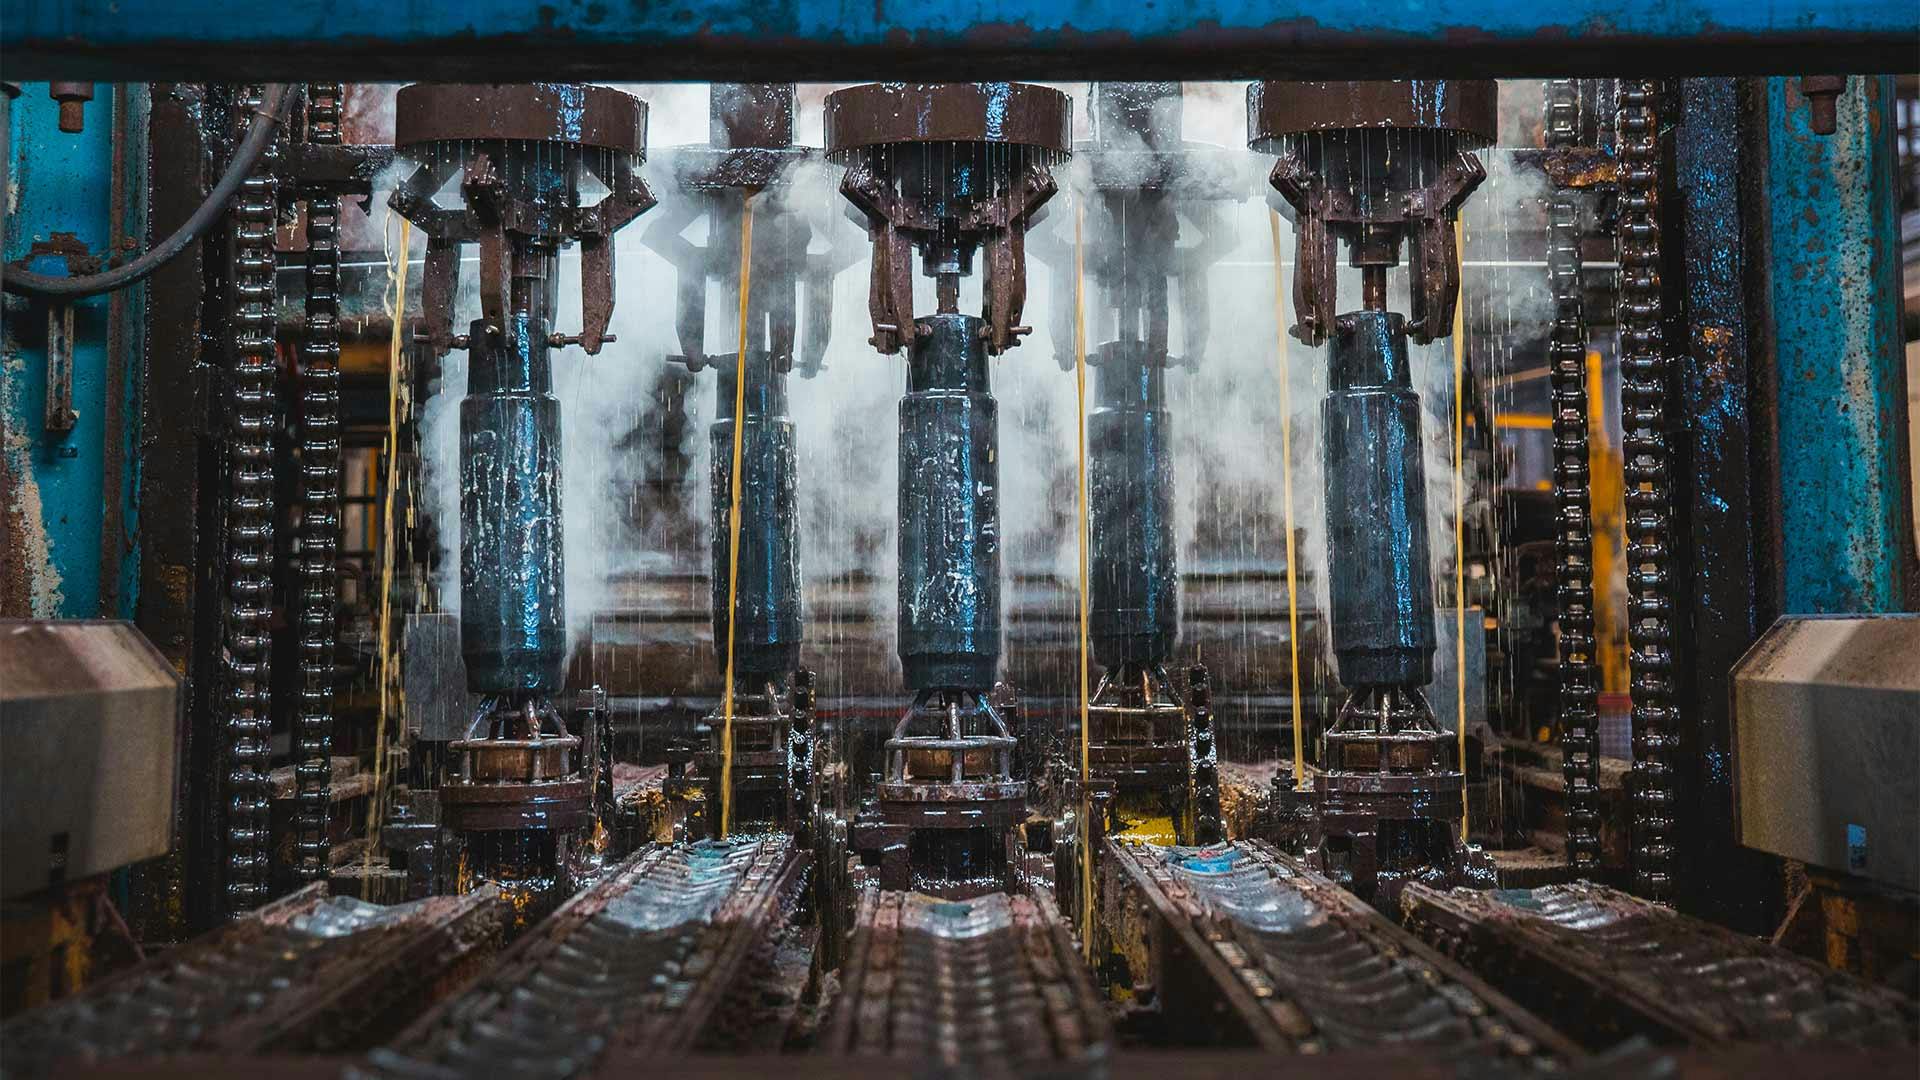 Steam curls around series of Grant Prideco pipes as they are cooled during manufacturing